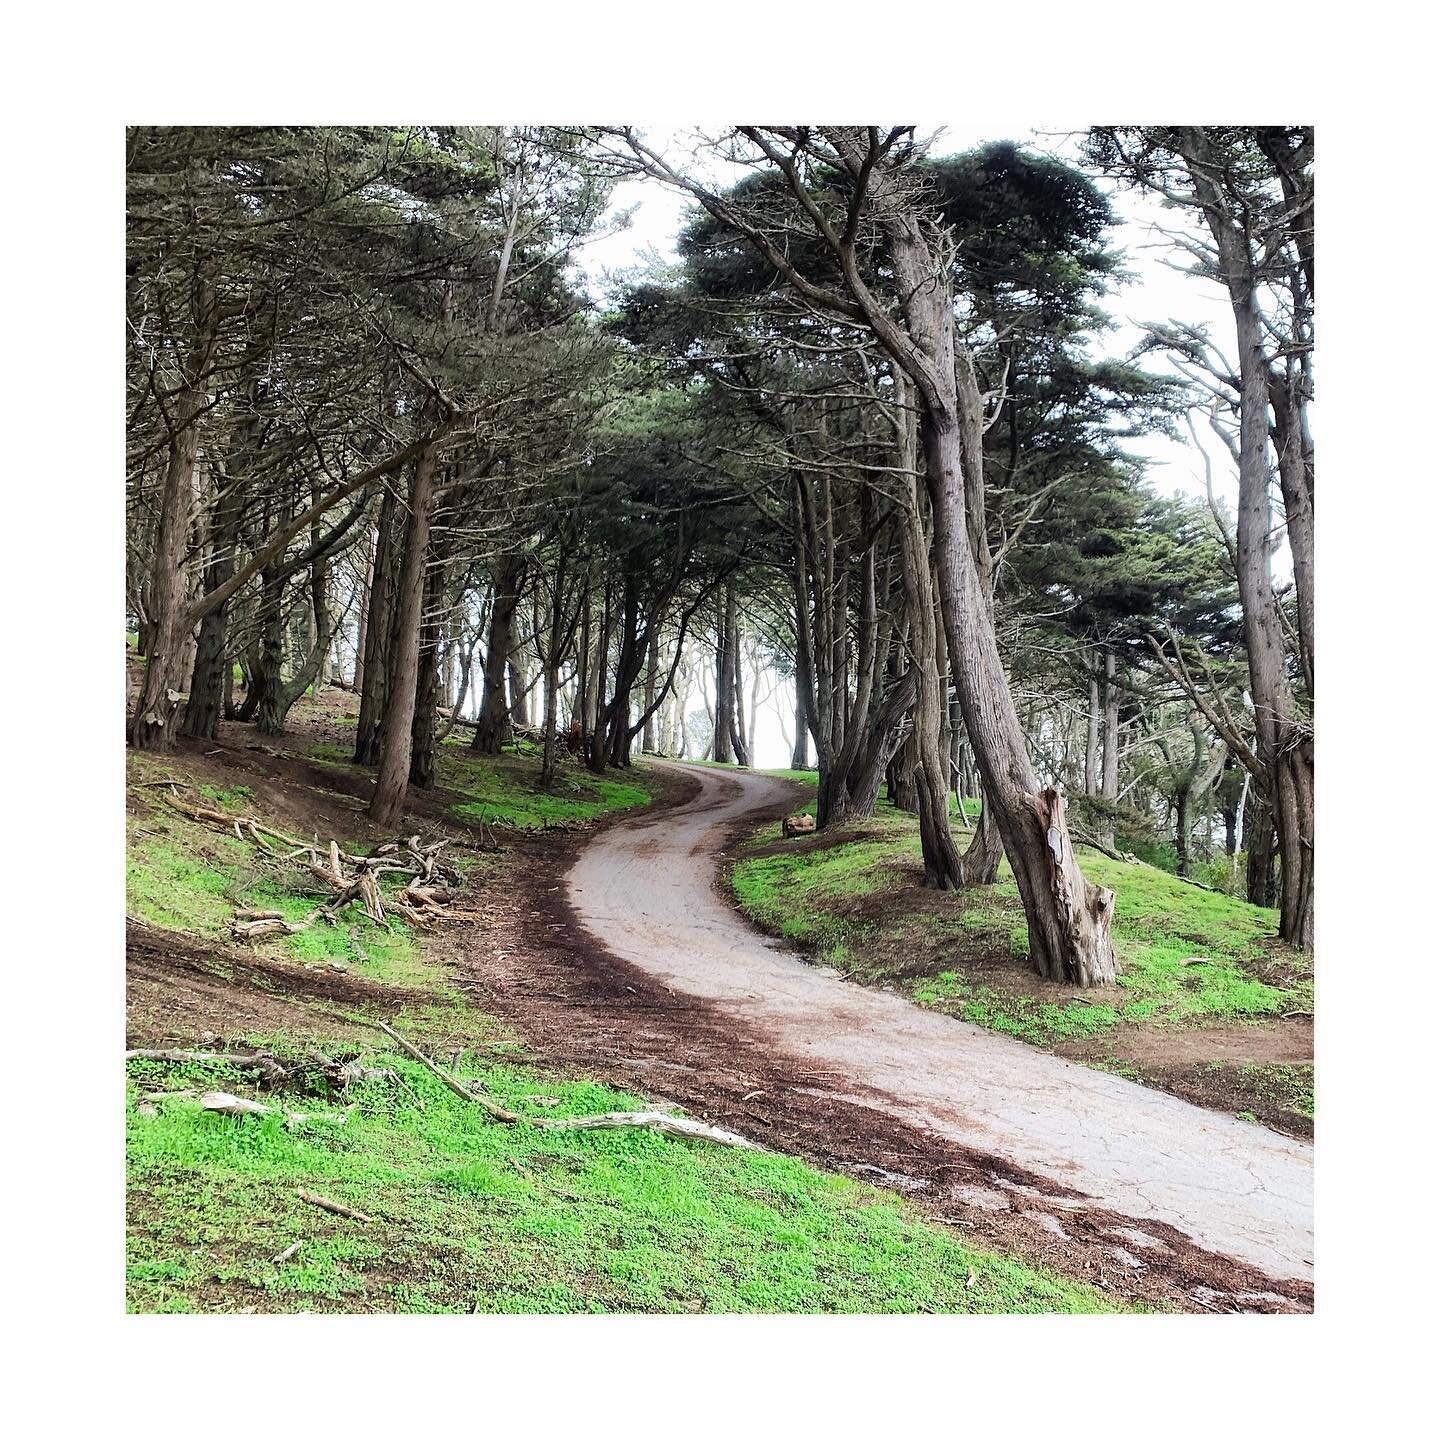 🏃🏻&zwj;♀️seen on my run: into the woods I go. I went with local bird songs instead of a podcast. Highly recommended. 5 out of 5 stars 🐦
.
.
.
#goldengatepark #trailrunning #ilovetorun #instarunners #runsf #irun #trailrunner #womensrunningcommunity